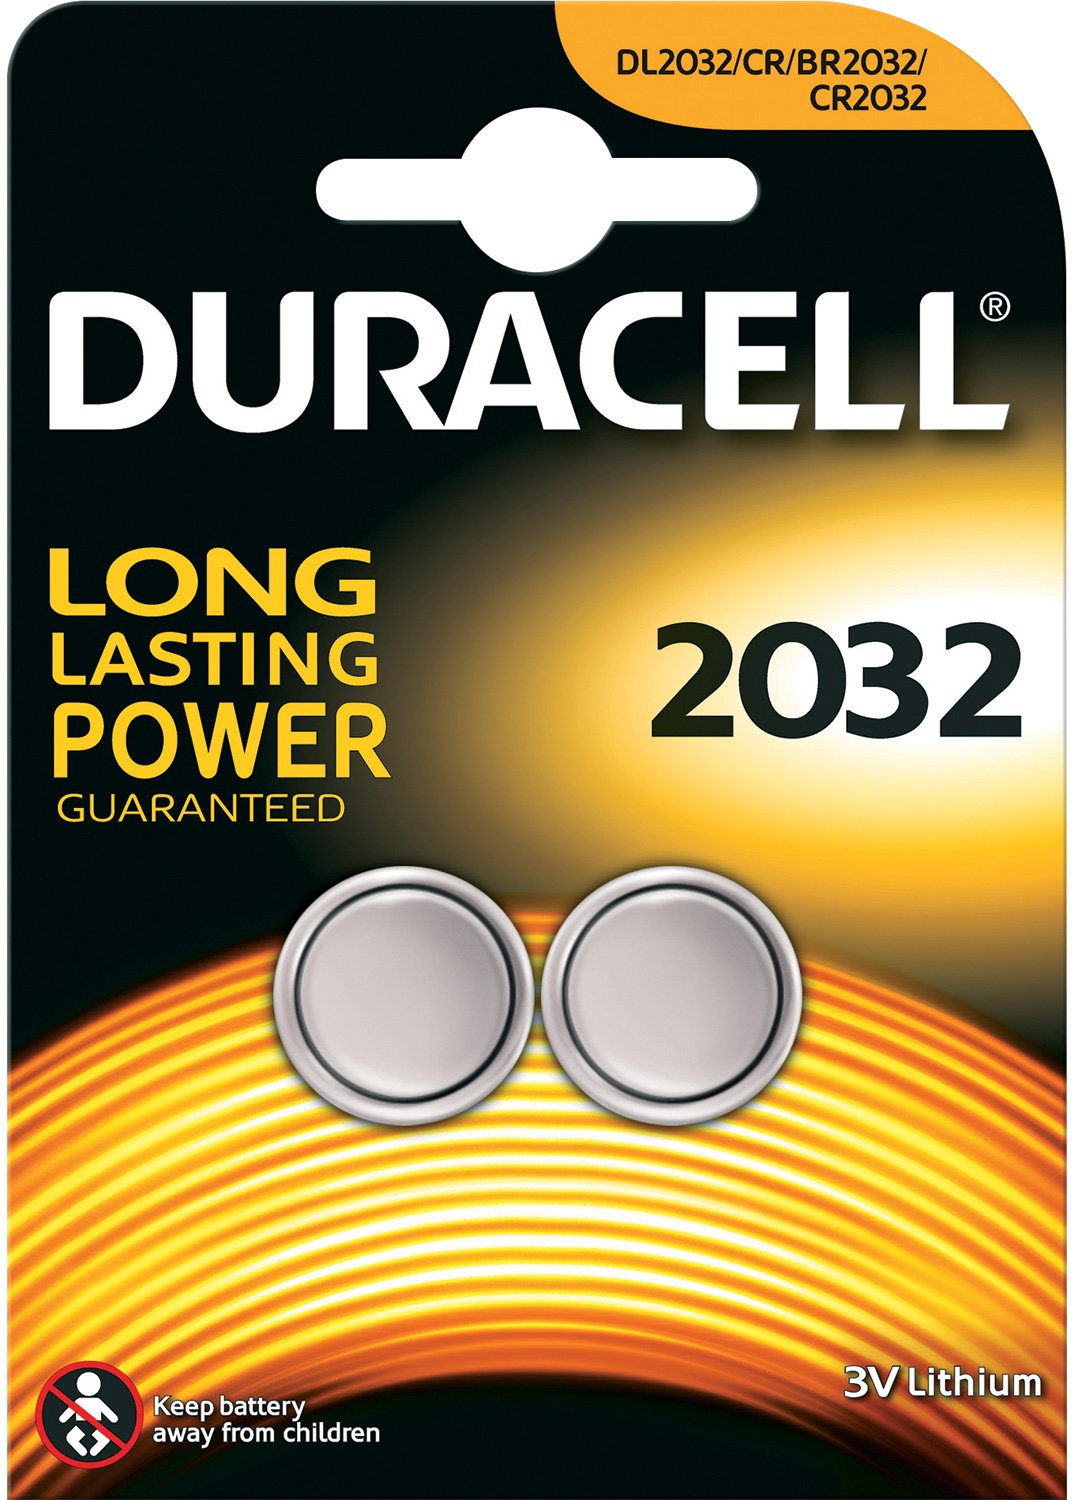 4 Pcs Duracell 2032 CR2032 3v Lithium Coin Cell Battery